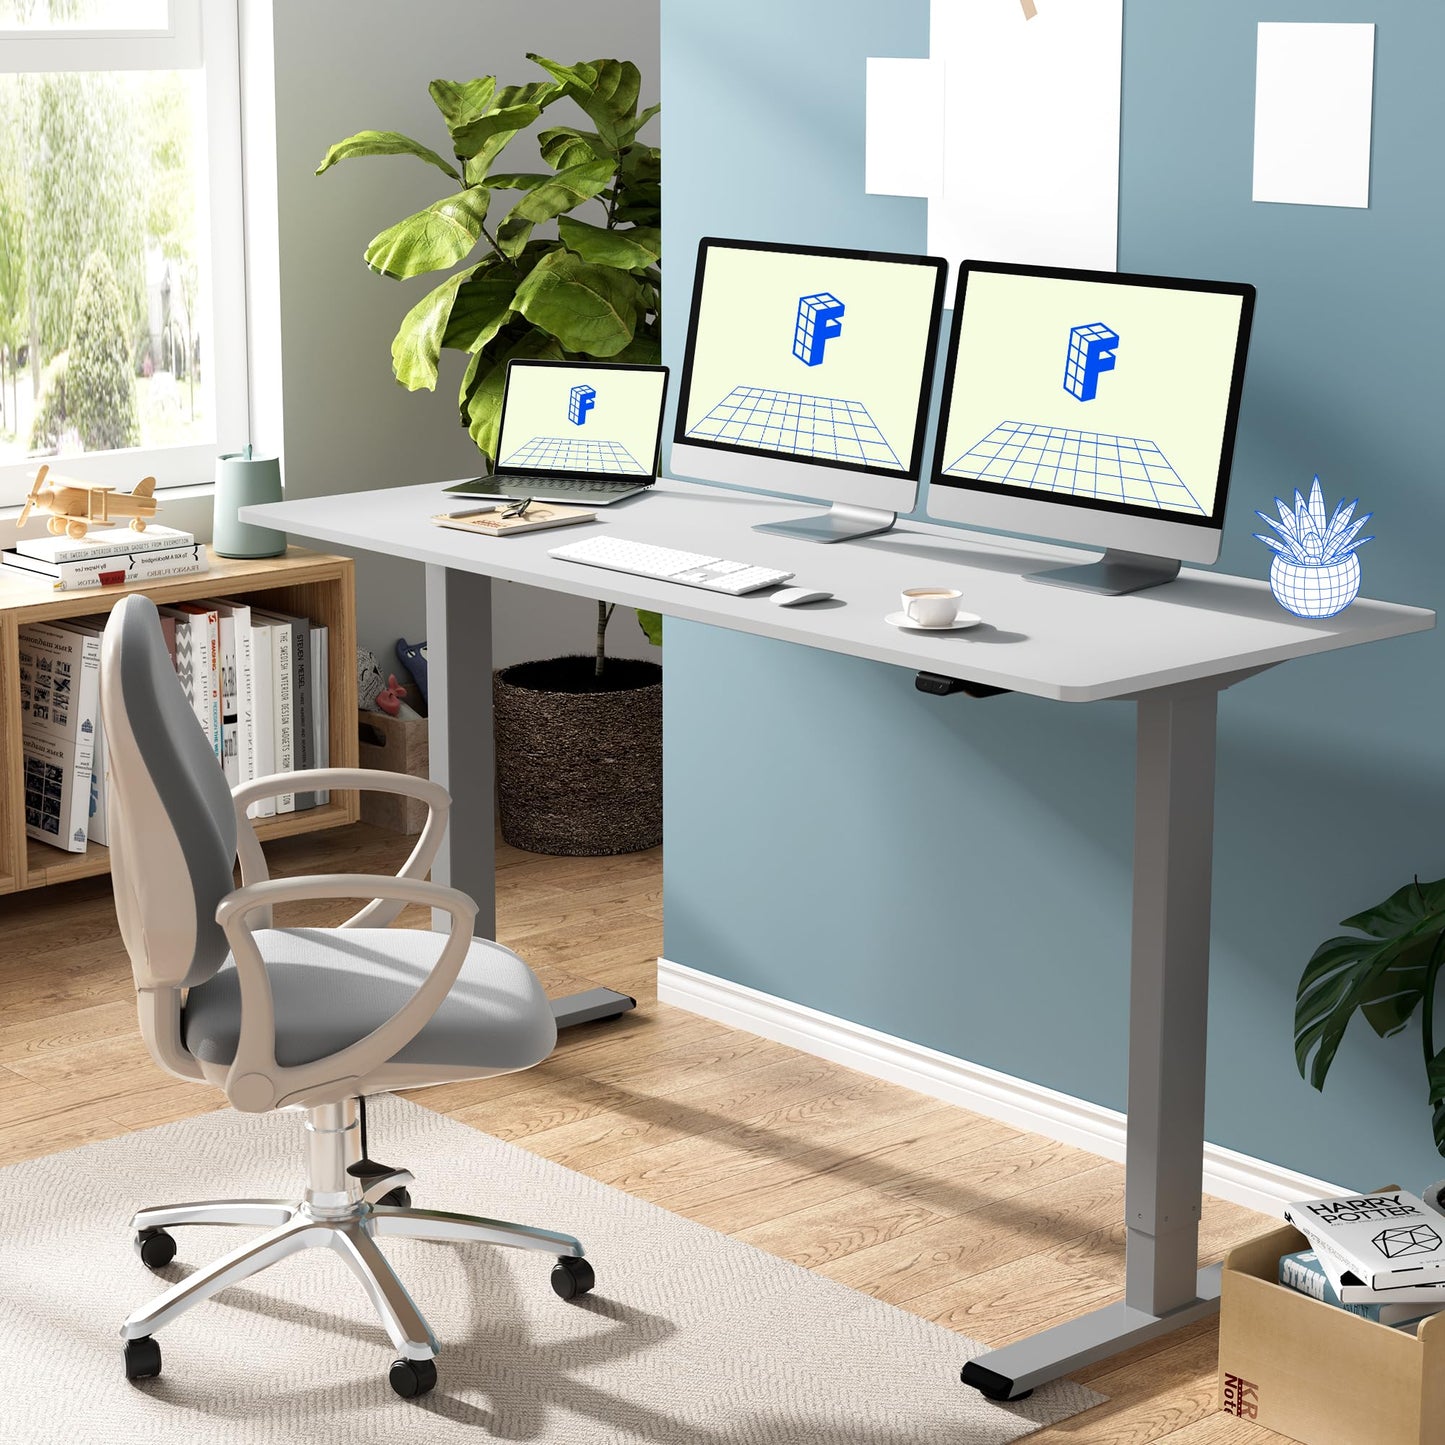 FLEXISPOT Adjustable Desk 60 x 24 Inches Stand Up Desk Workstation Electric Height Adjustable Standing Desk with Splice Board (Gray Frame + 60 inches